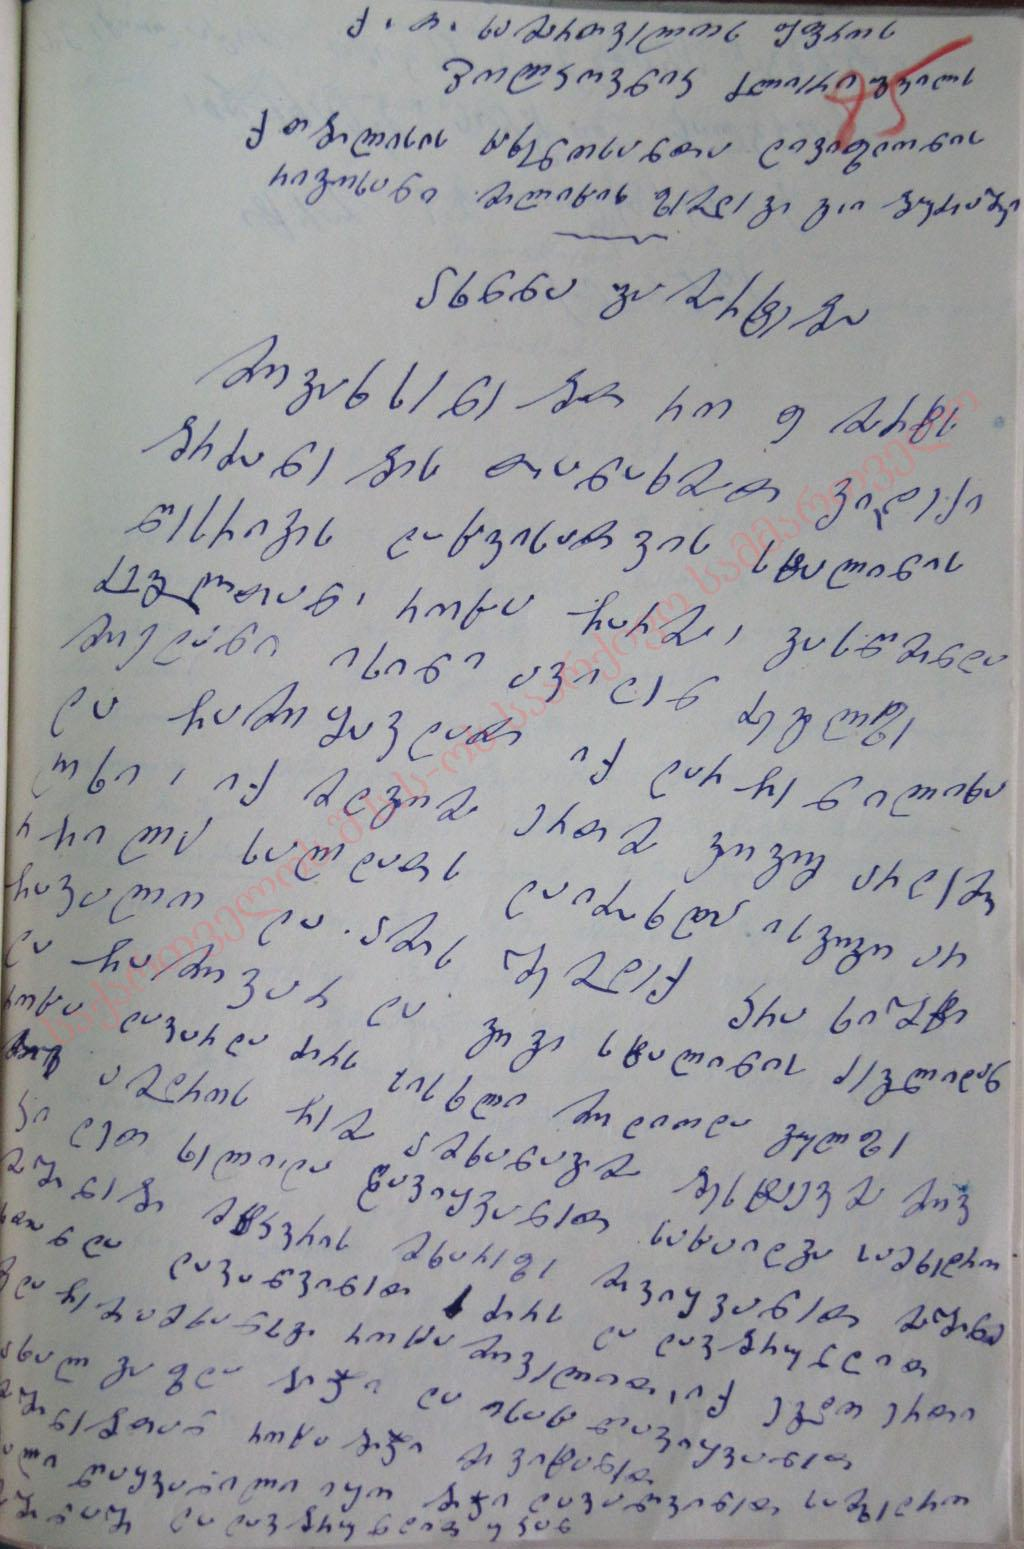 Details of the incident that happened by the pedestal of the statue of I.B. Stalin on March 9-10th. April 6th, 1956. Explanatory Letter of sergeant mayor Budziashvili